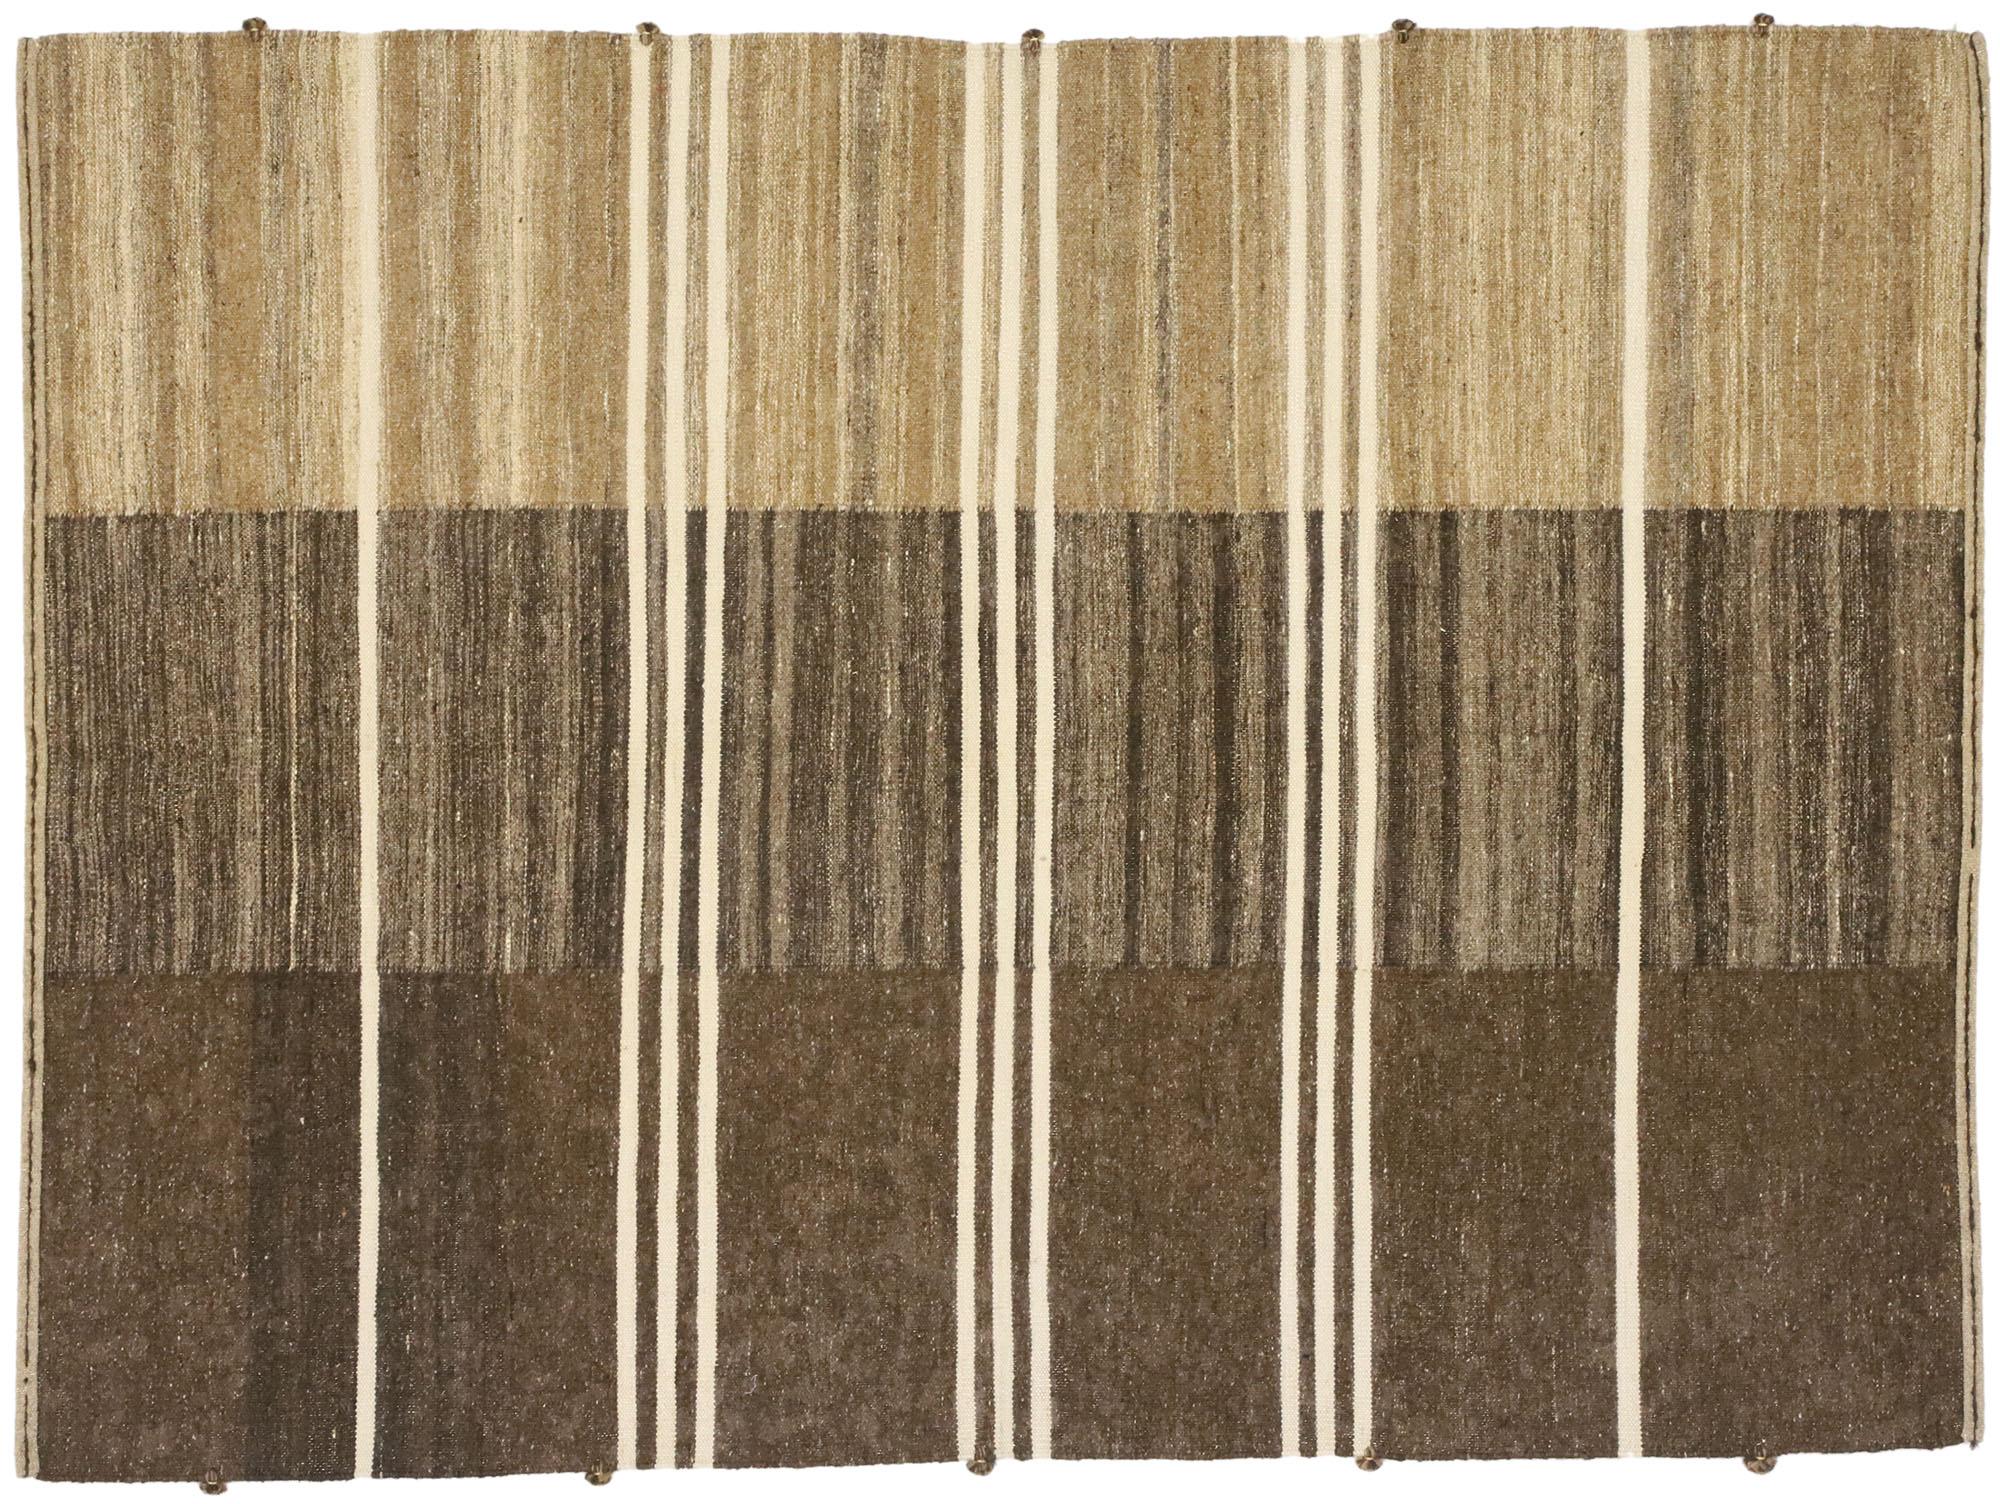 New Contemporary Striped Kilim Rug with Modern Style, Brown Flat-Weave Rug 3